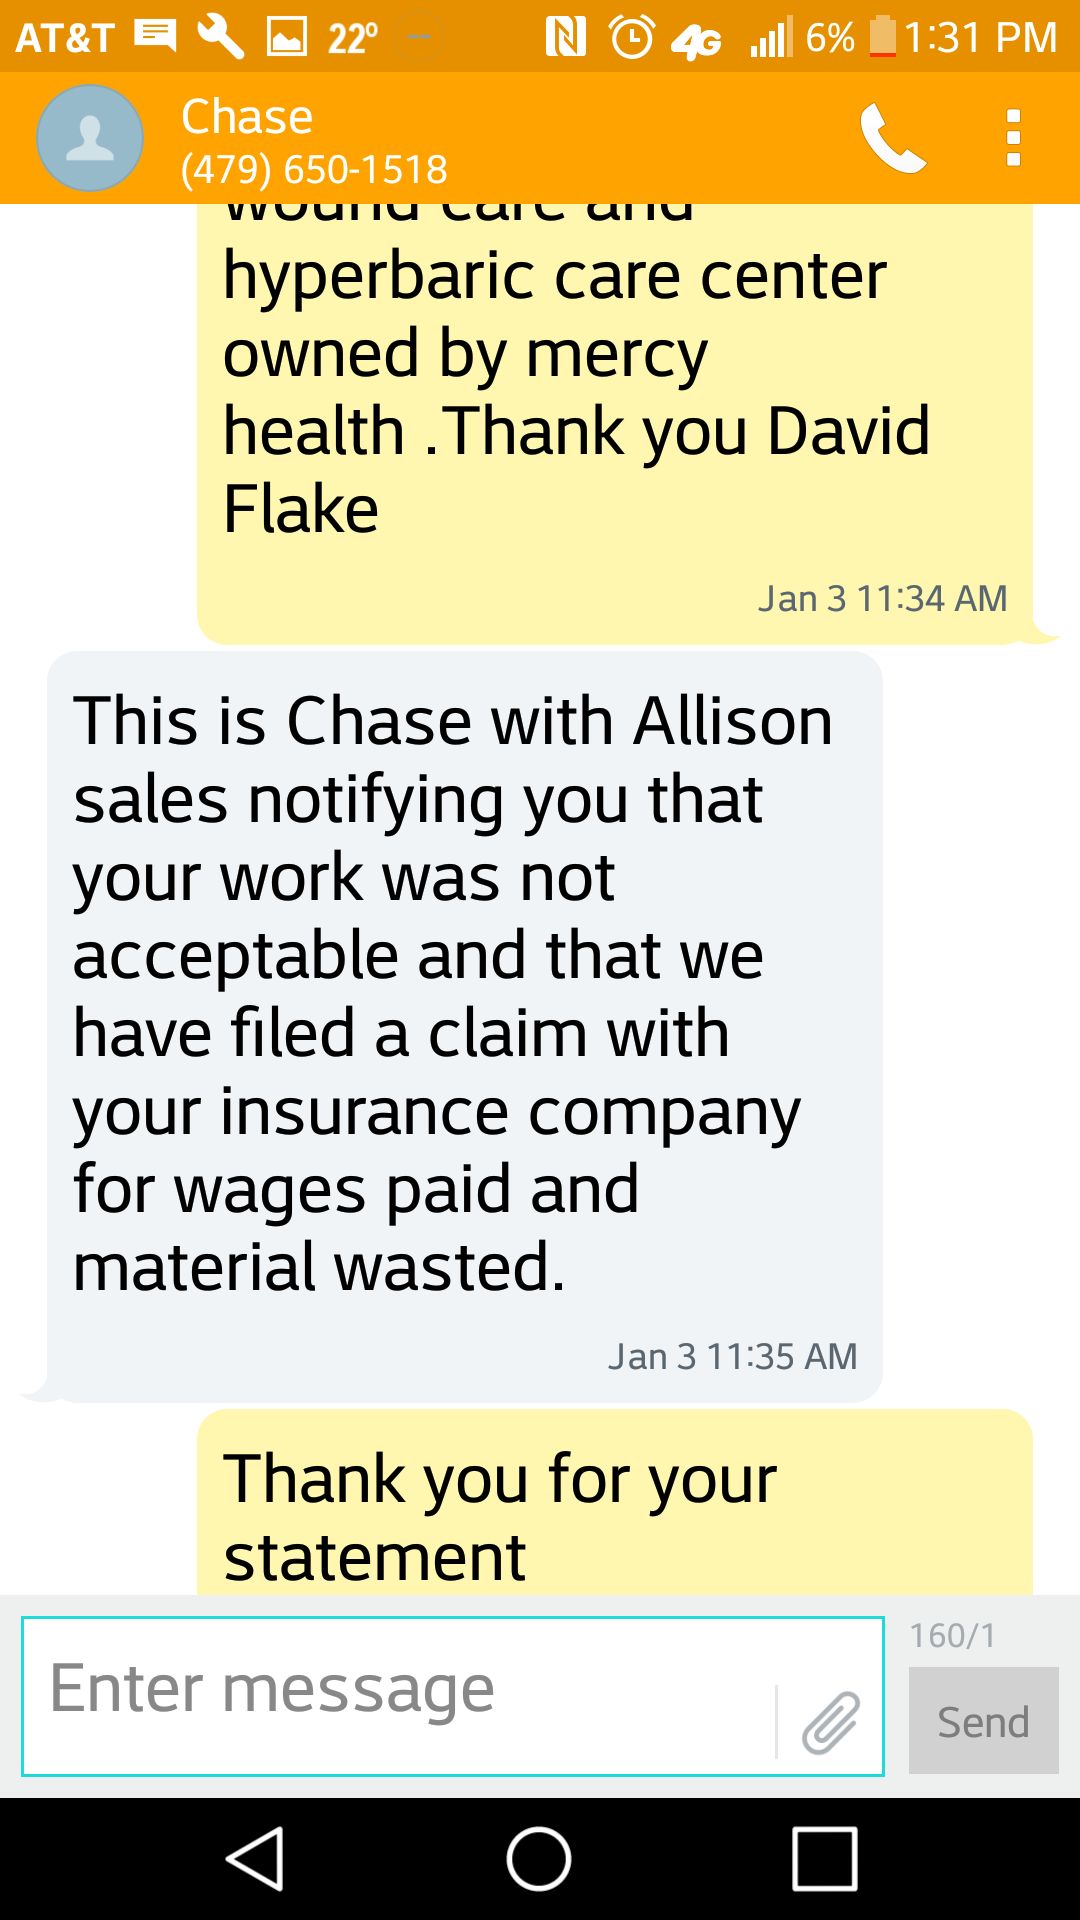 More texts confirming fraud